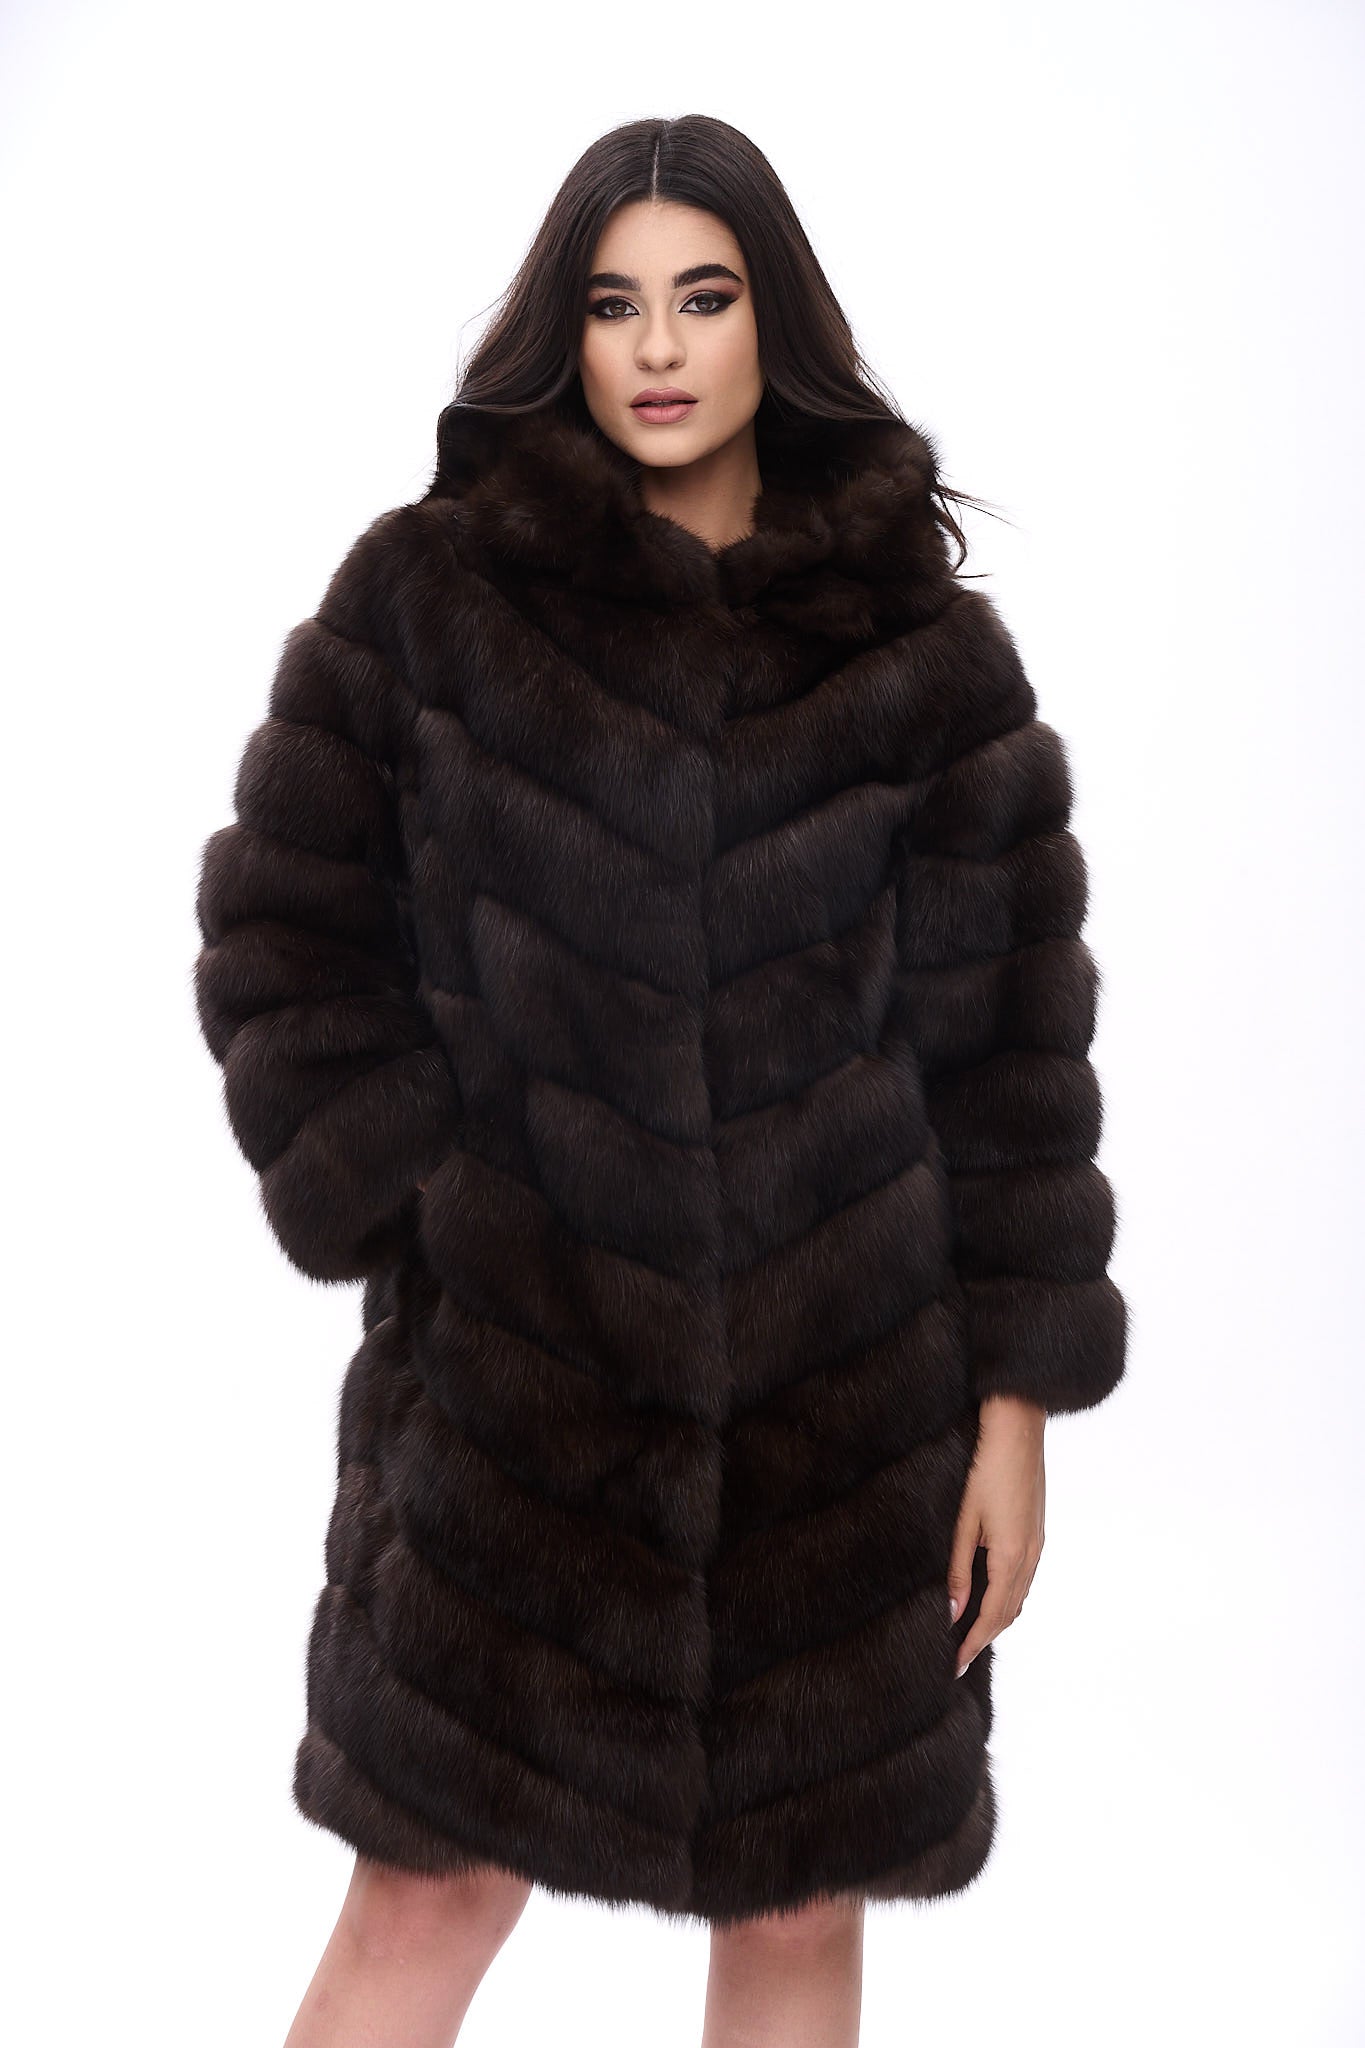 Hooded sable coat